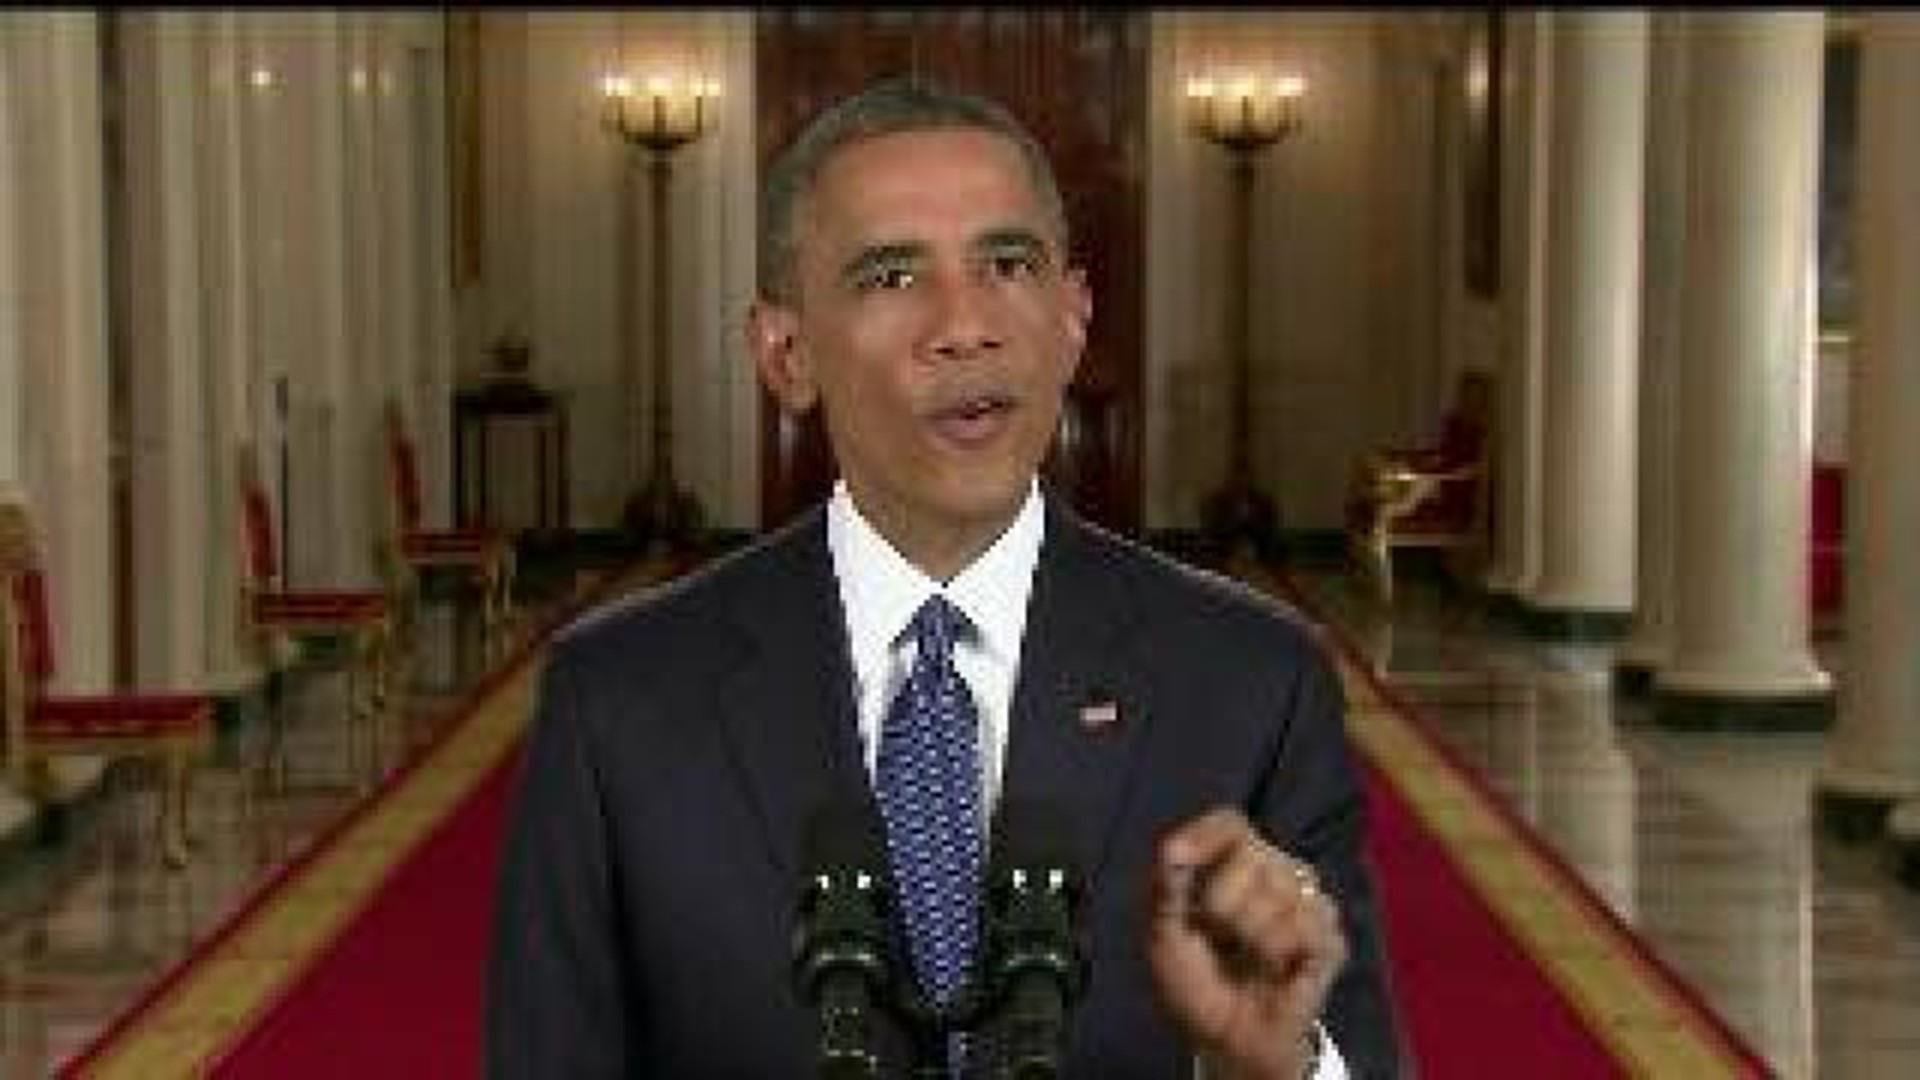 President Obama orders immigration system overhaul